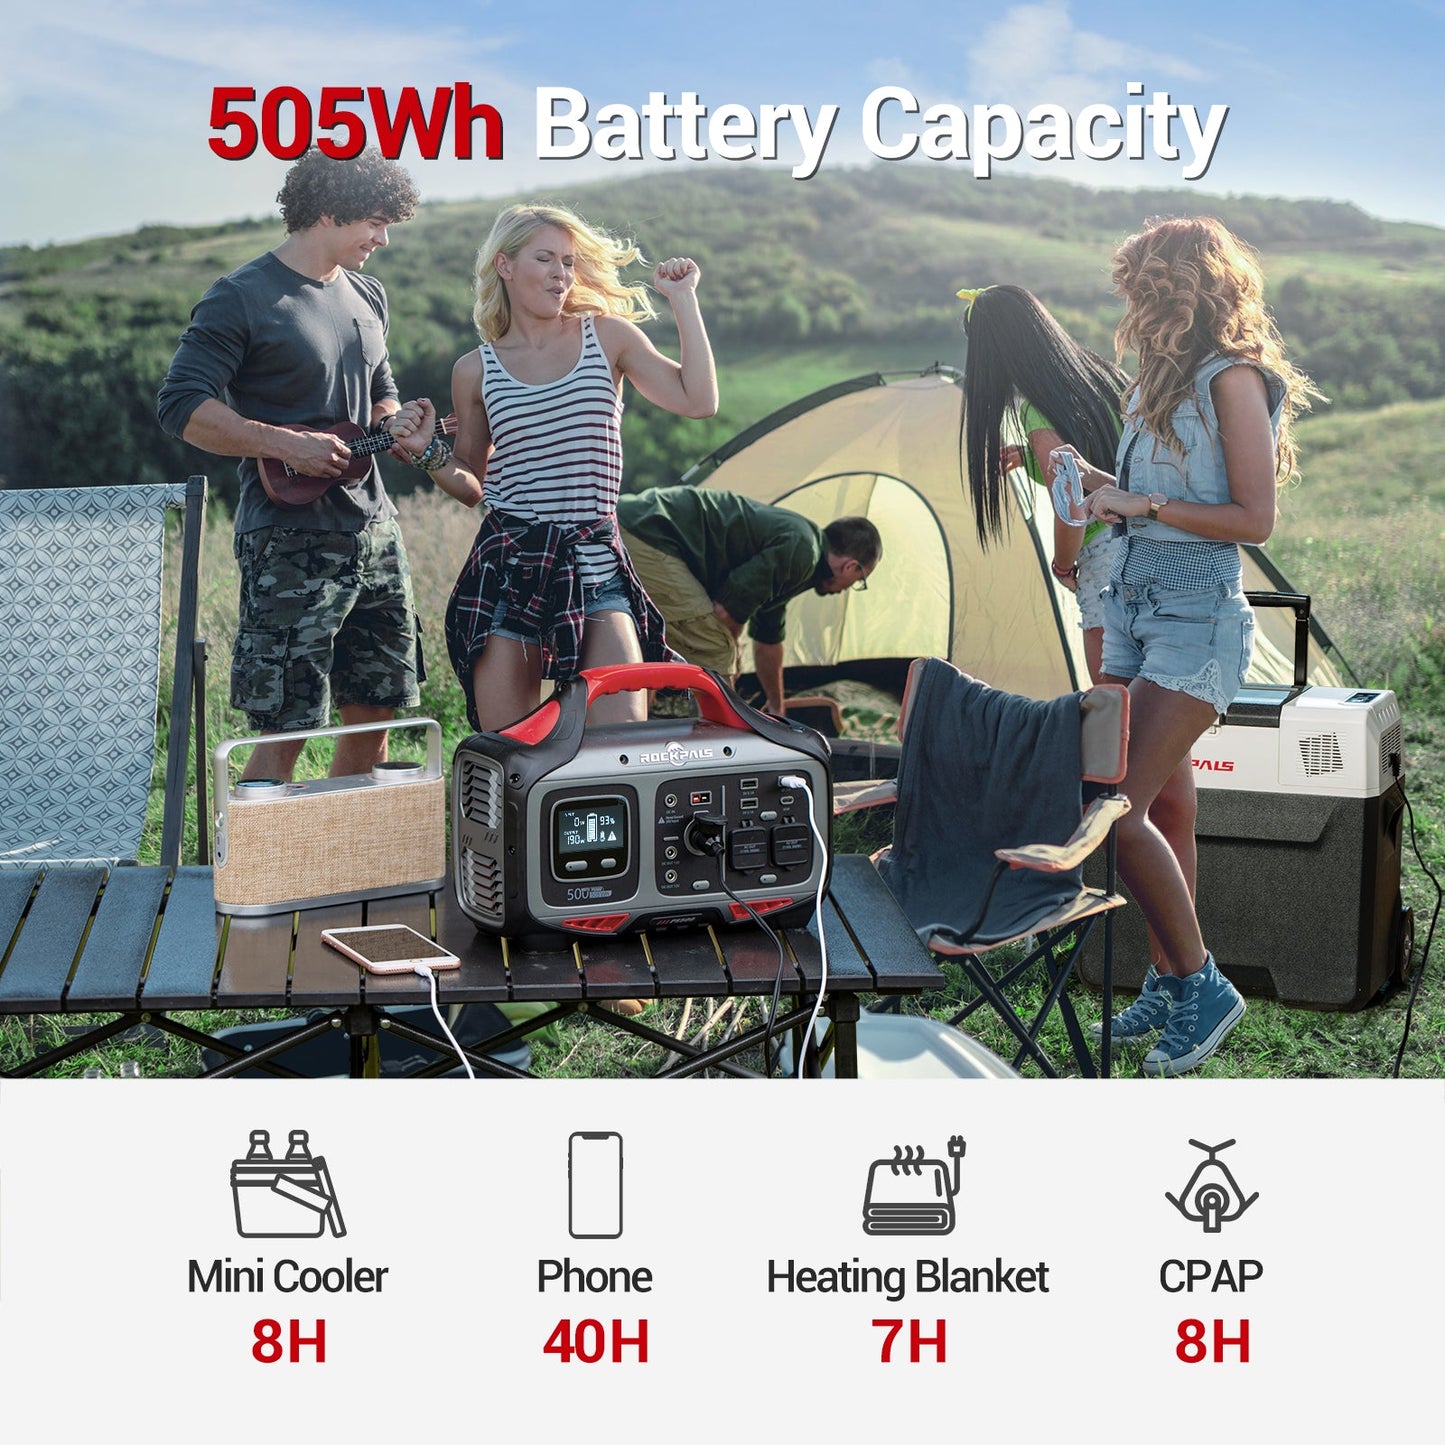 Rockpals Rockpower 500W Portable Power Station - Solar Generator for Camping Road Trip, Outdoor Adventure